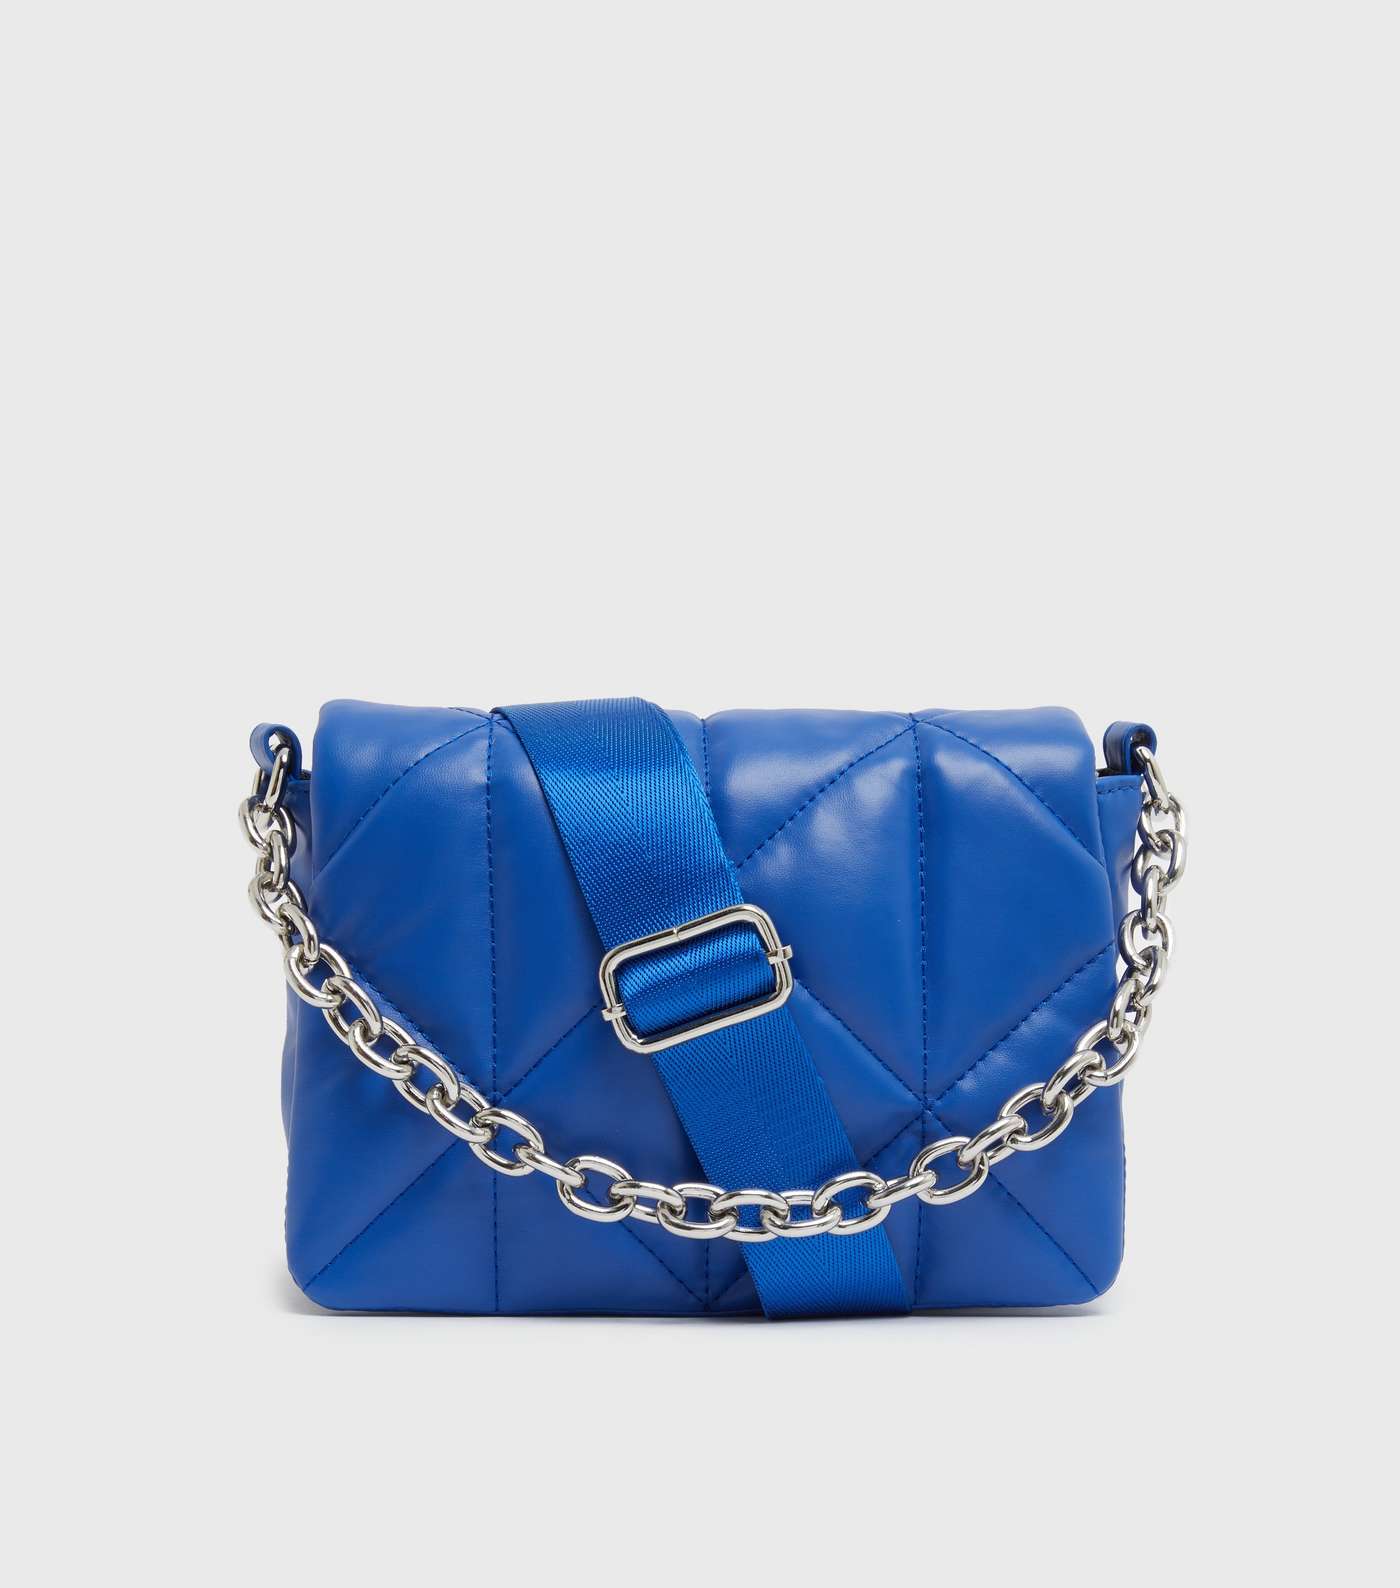 Bright Blue Leather-Look Chain Webbed Shoulder Strap Cross Body Bag